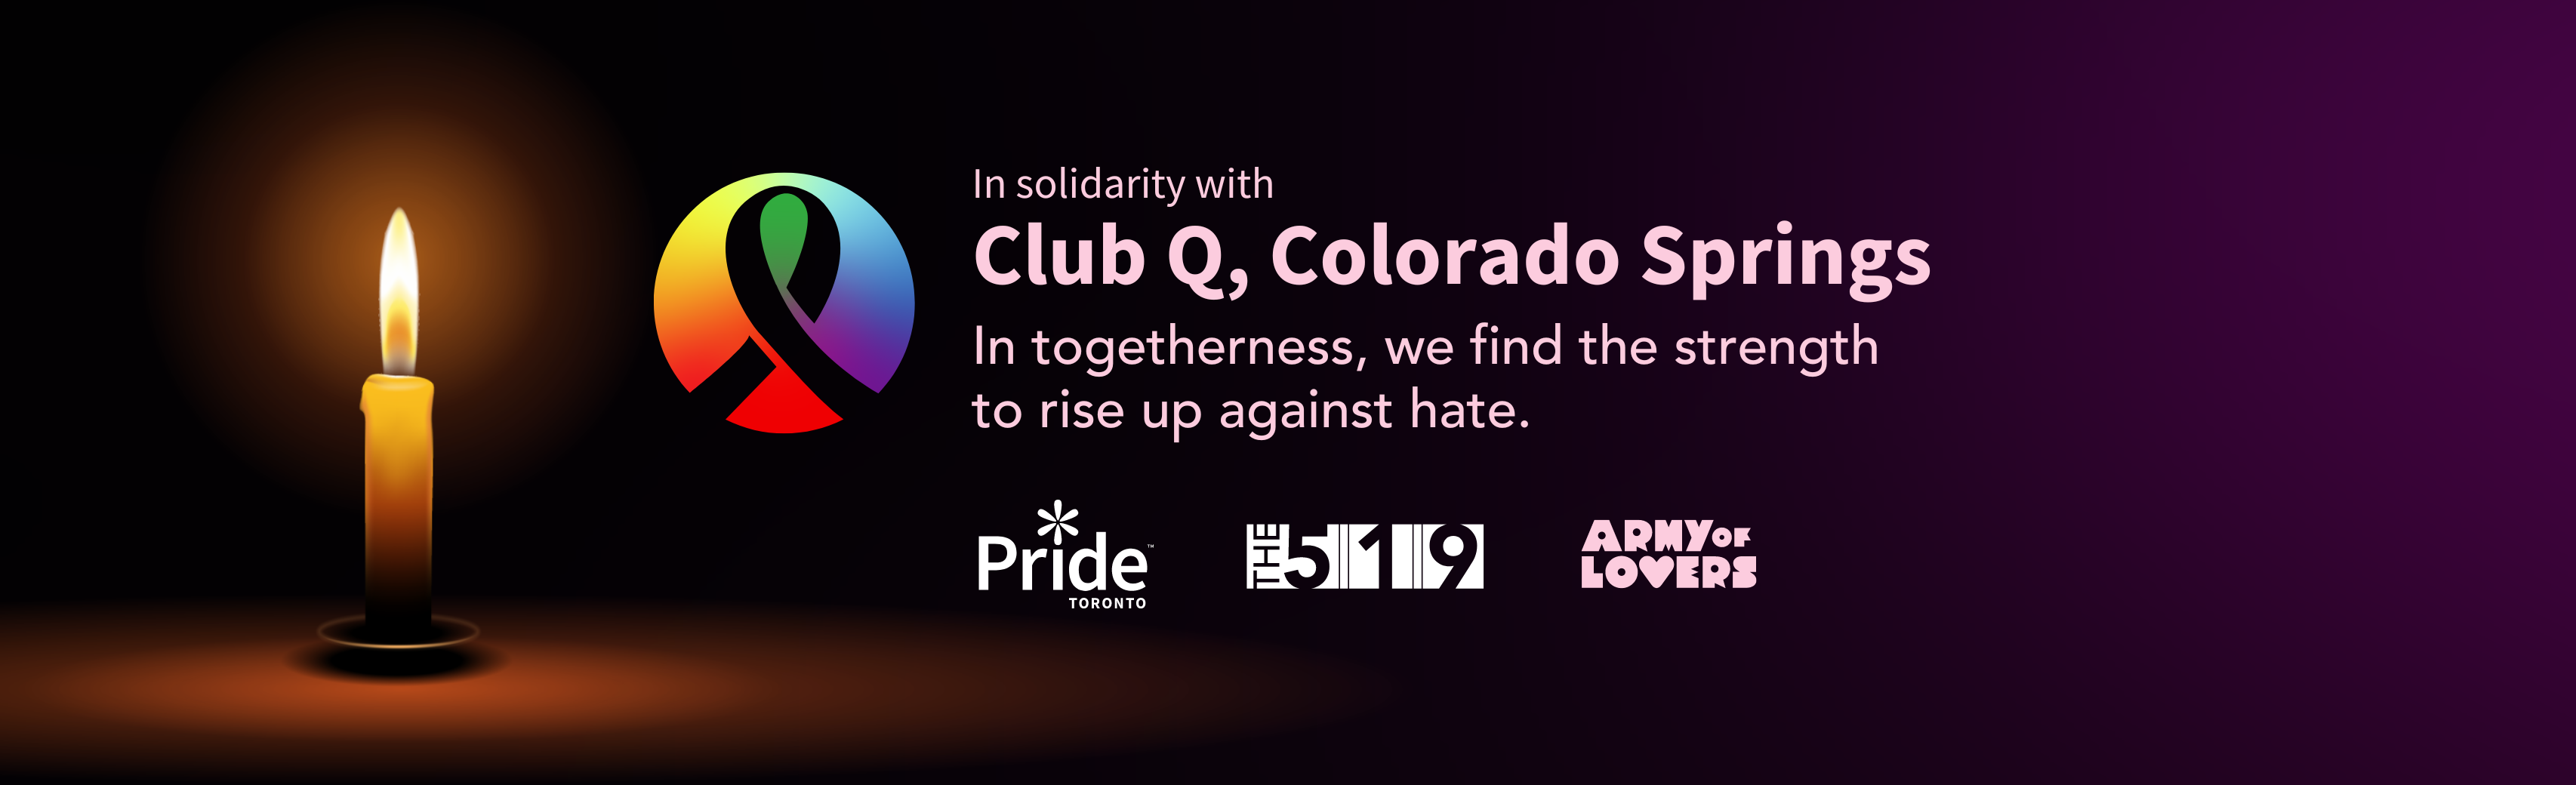 In Solidarity with Club Q